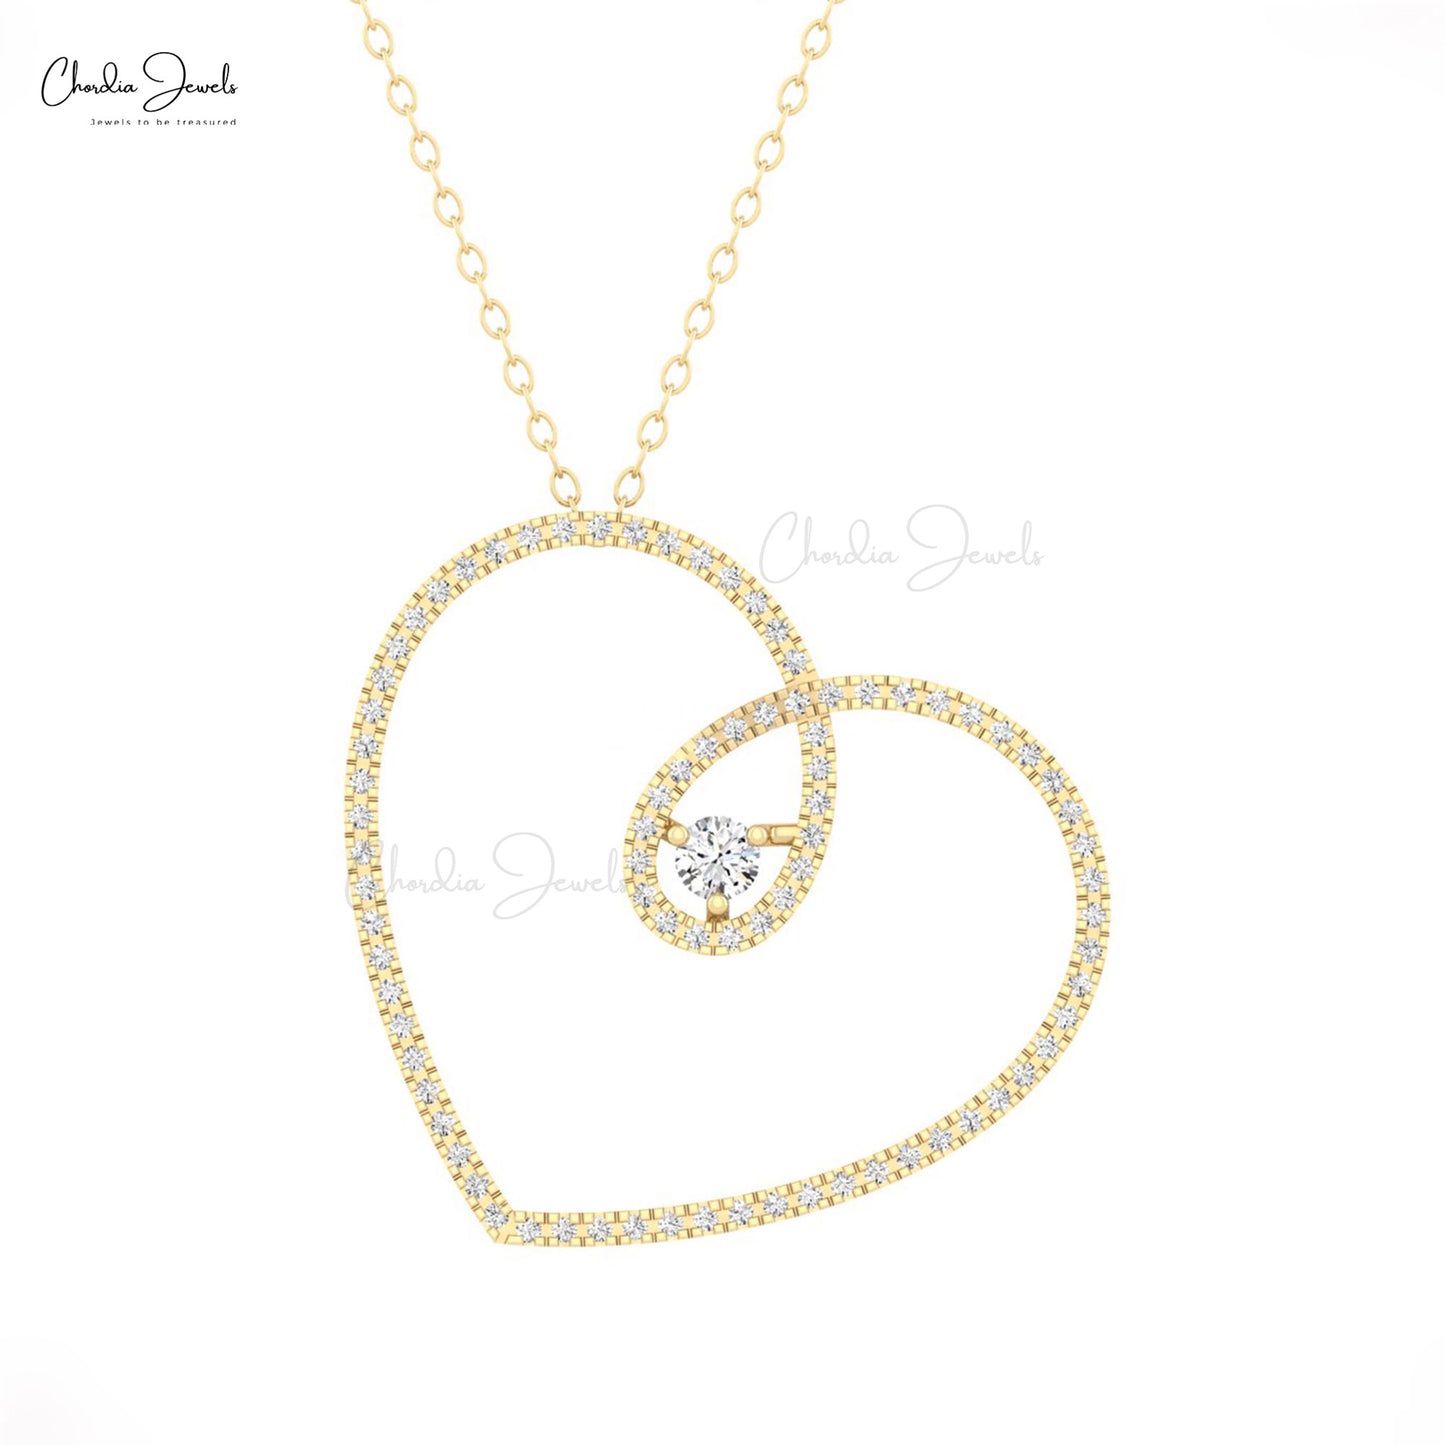 Genuine 0.44ct White Diamond Open Heart Necklace 14K Solid Gold Eternity Necklace For Love